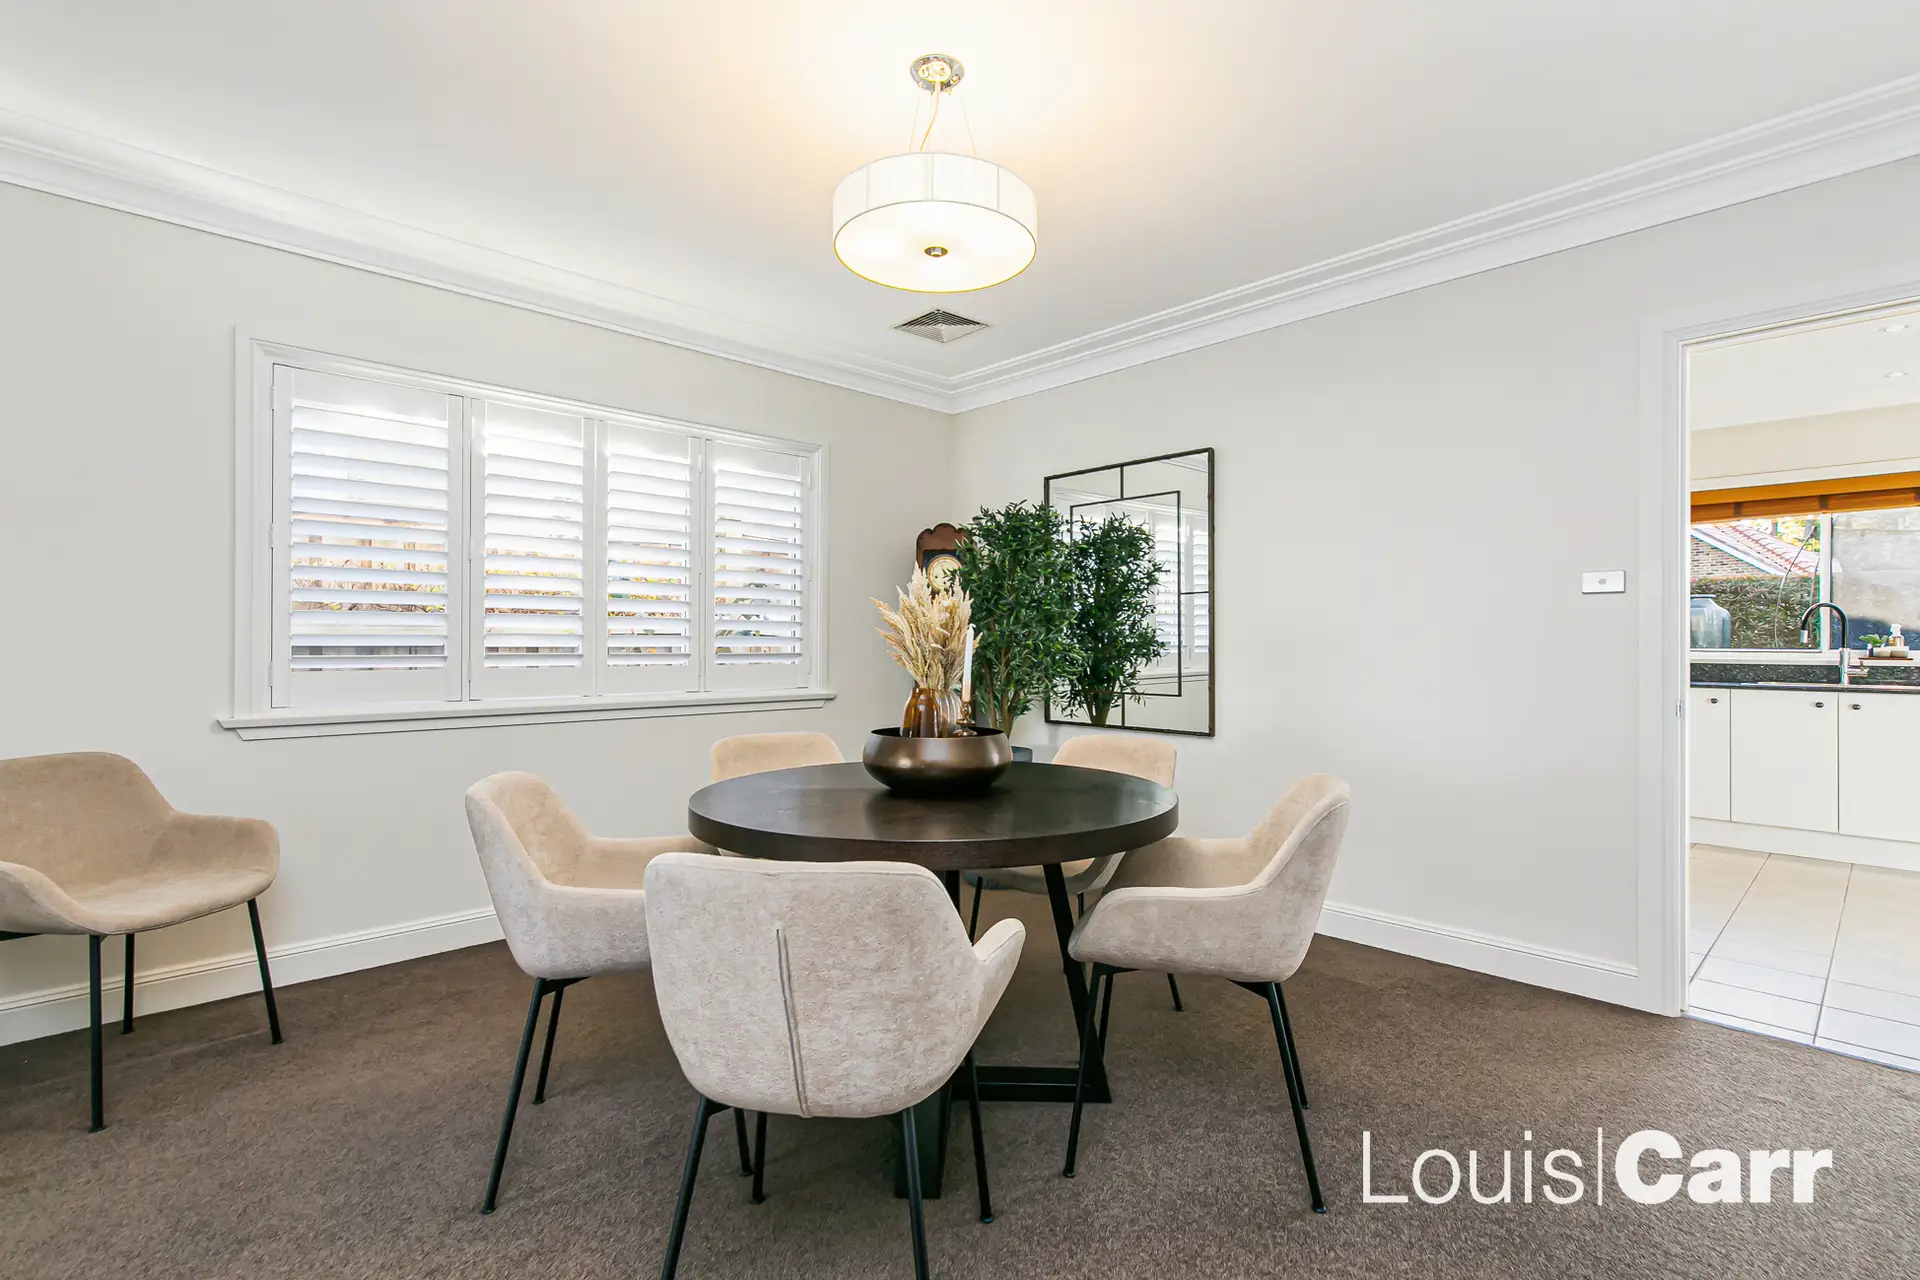 Photo #4: 12 Kambah Place, West Pennant Hills - Sold by Louis Carr Real Estate